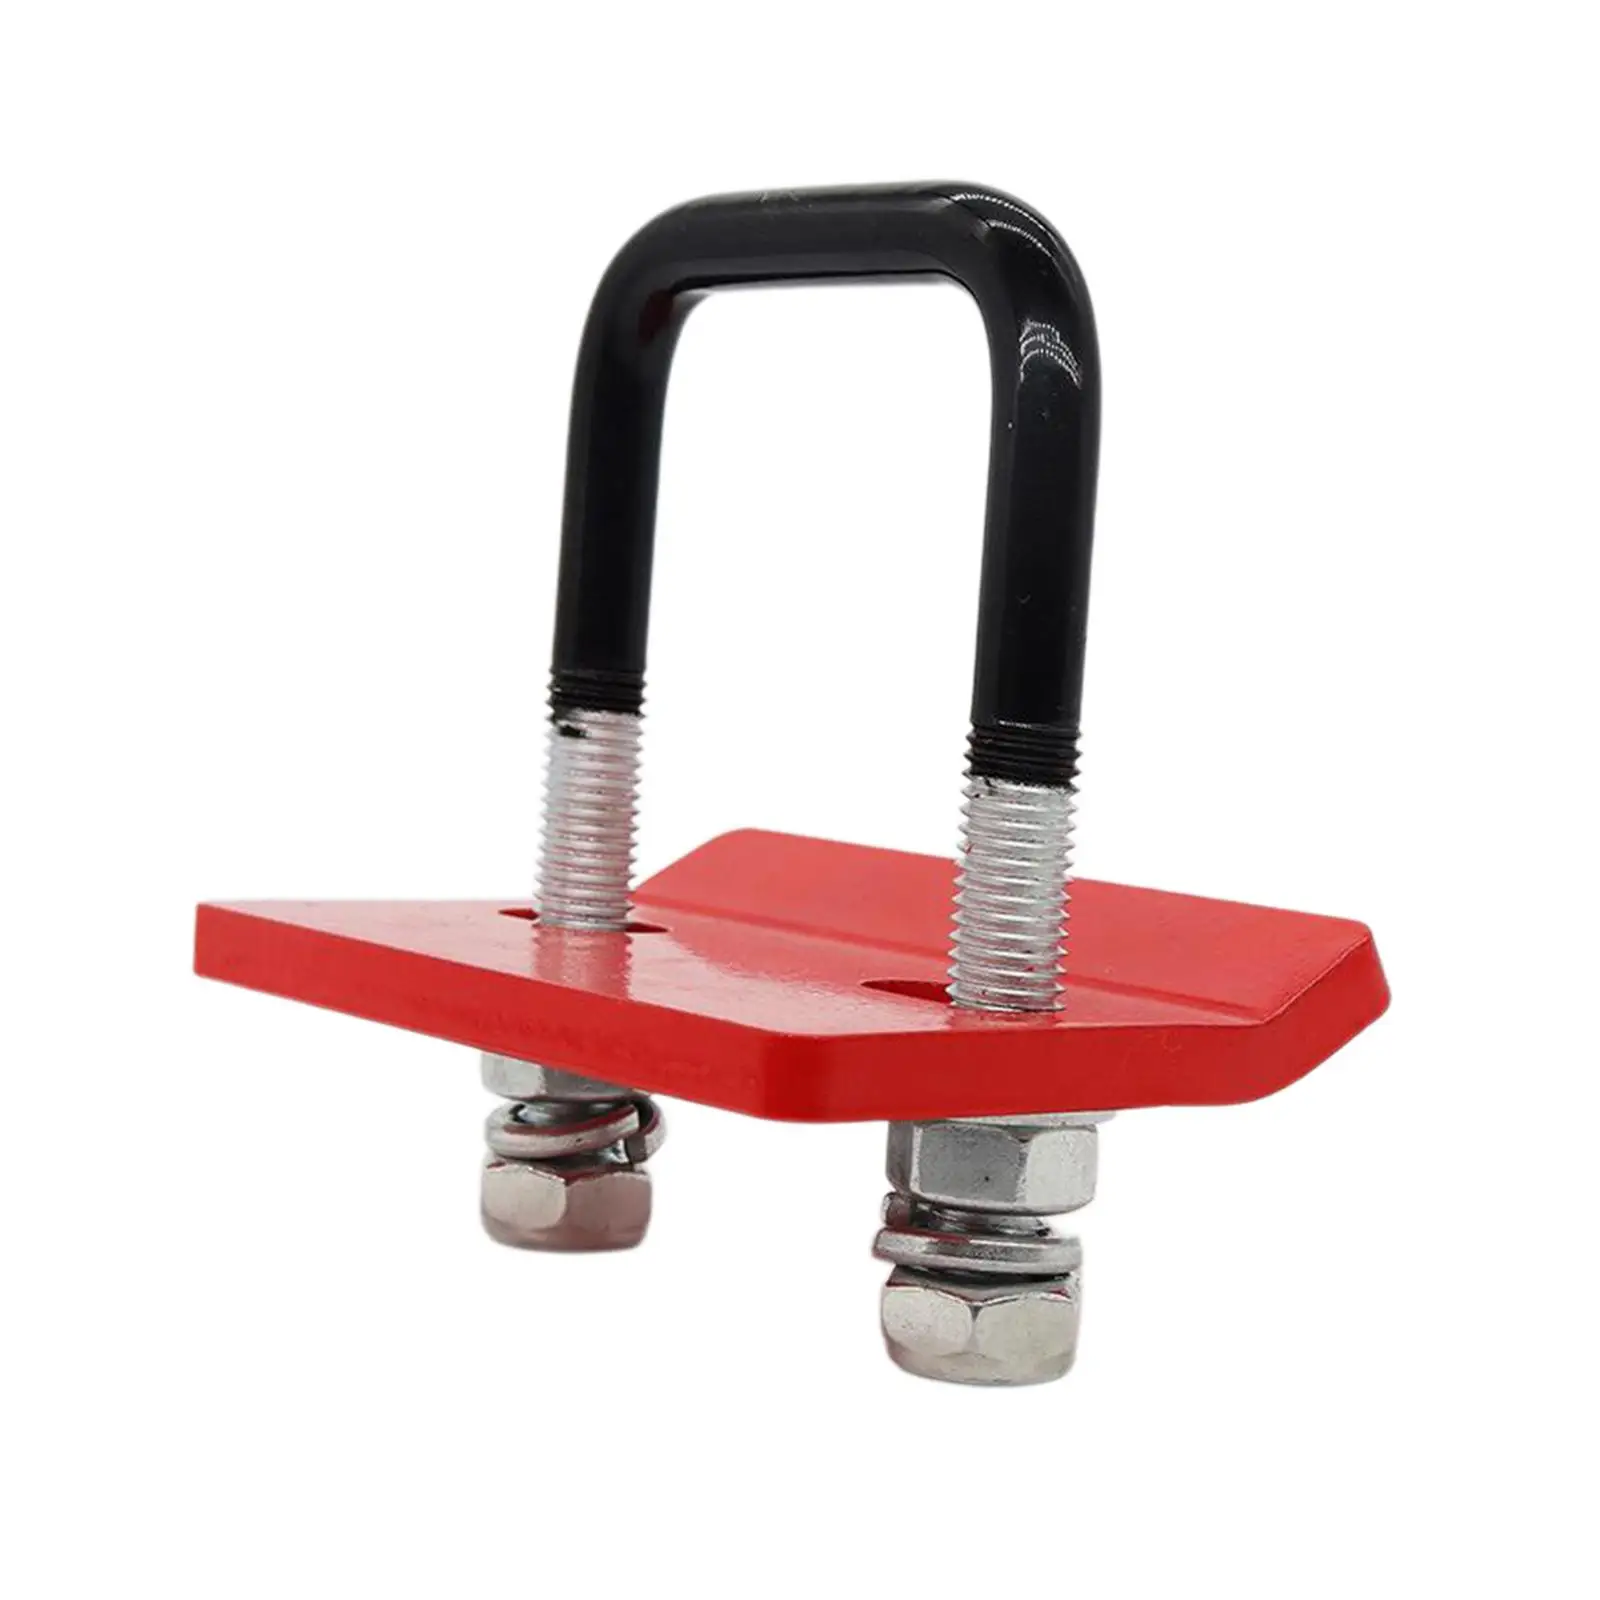 Hitch Tightener Transportation Heavy Duty Trailer Hitches Clamp Hitch Stabilizer for Boat Trailer Hitch Tray Bike Rack